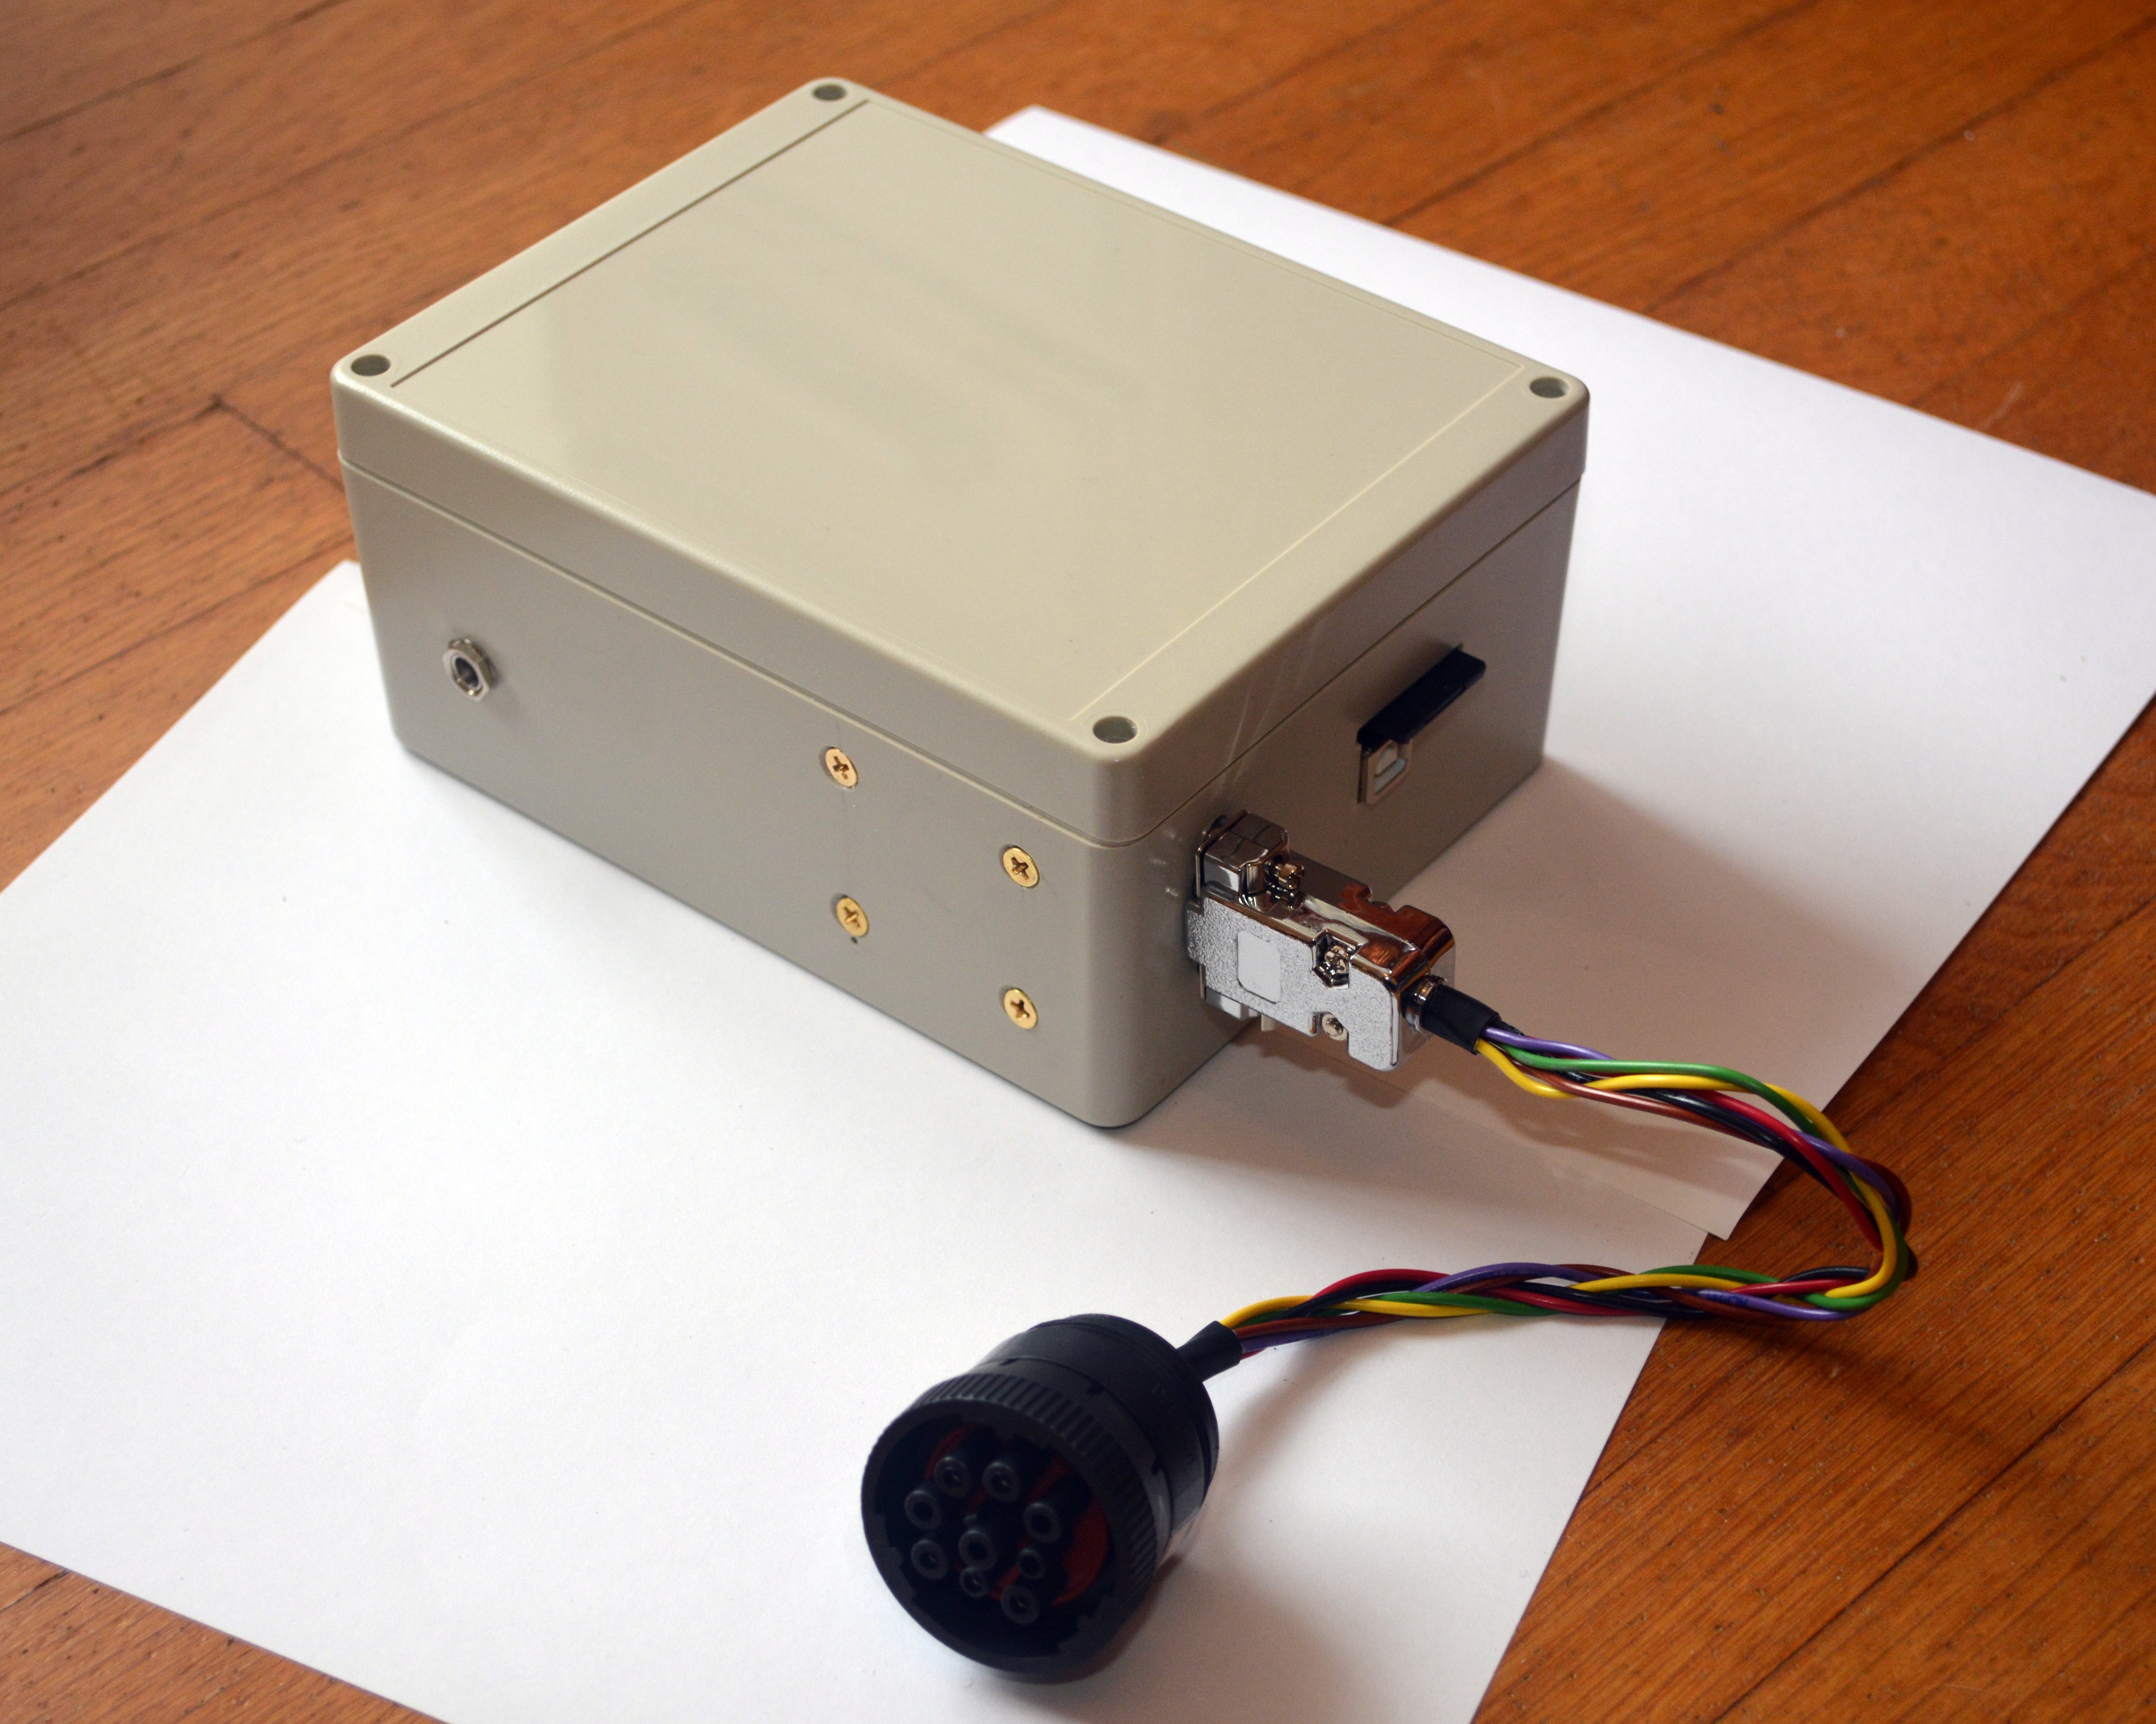 Propane injector control unit first prototype